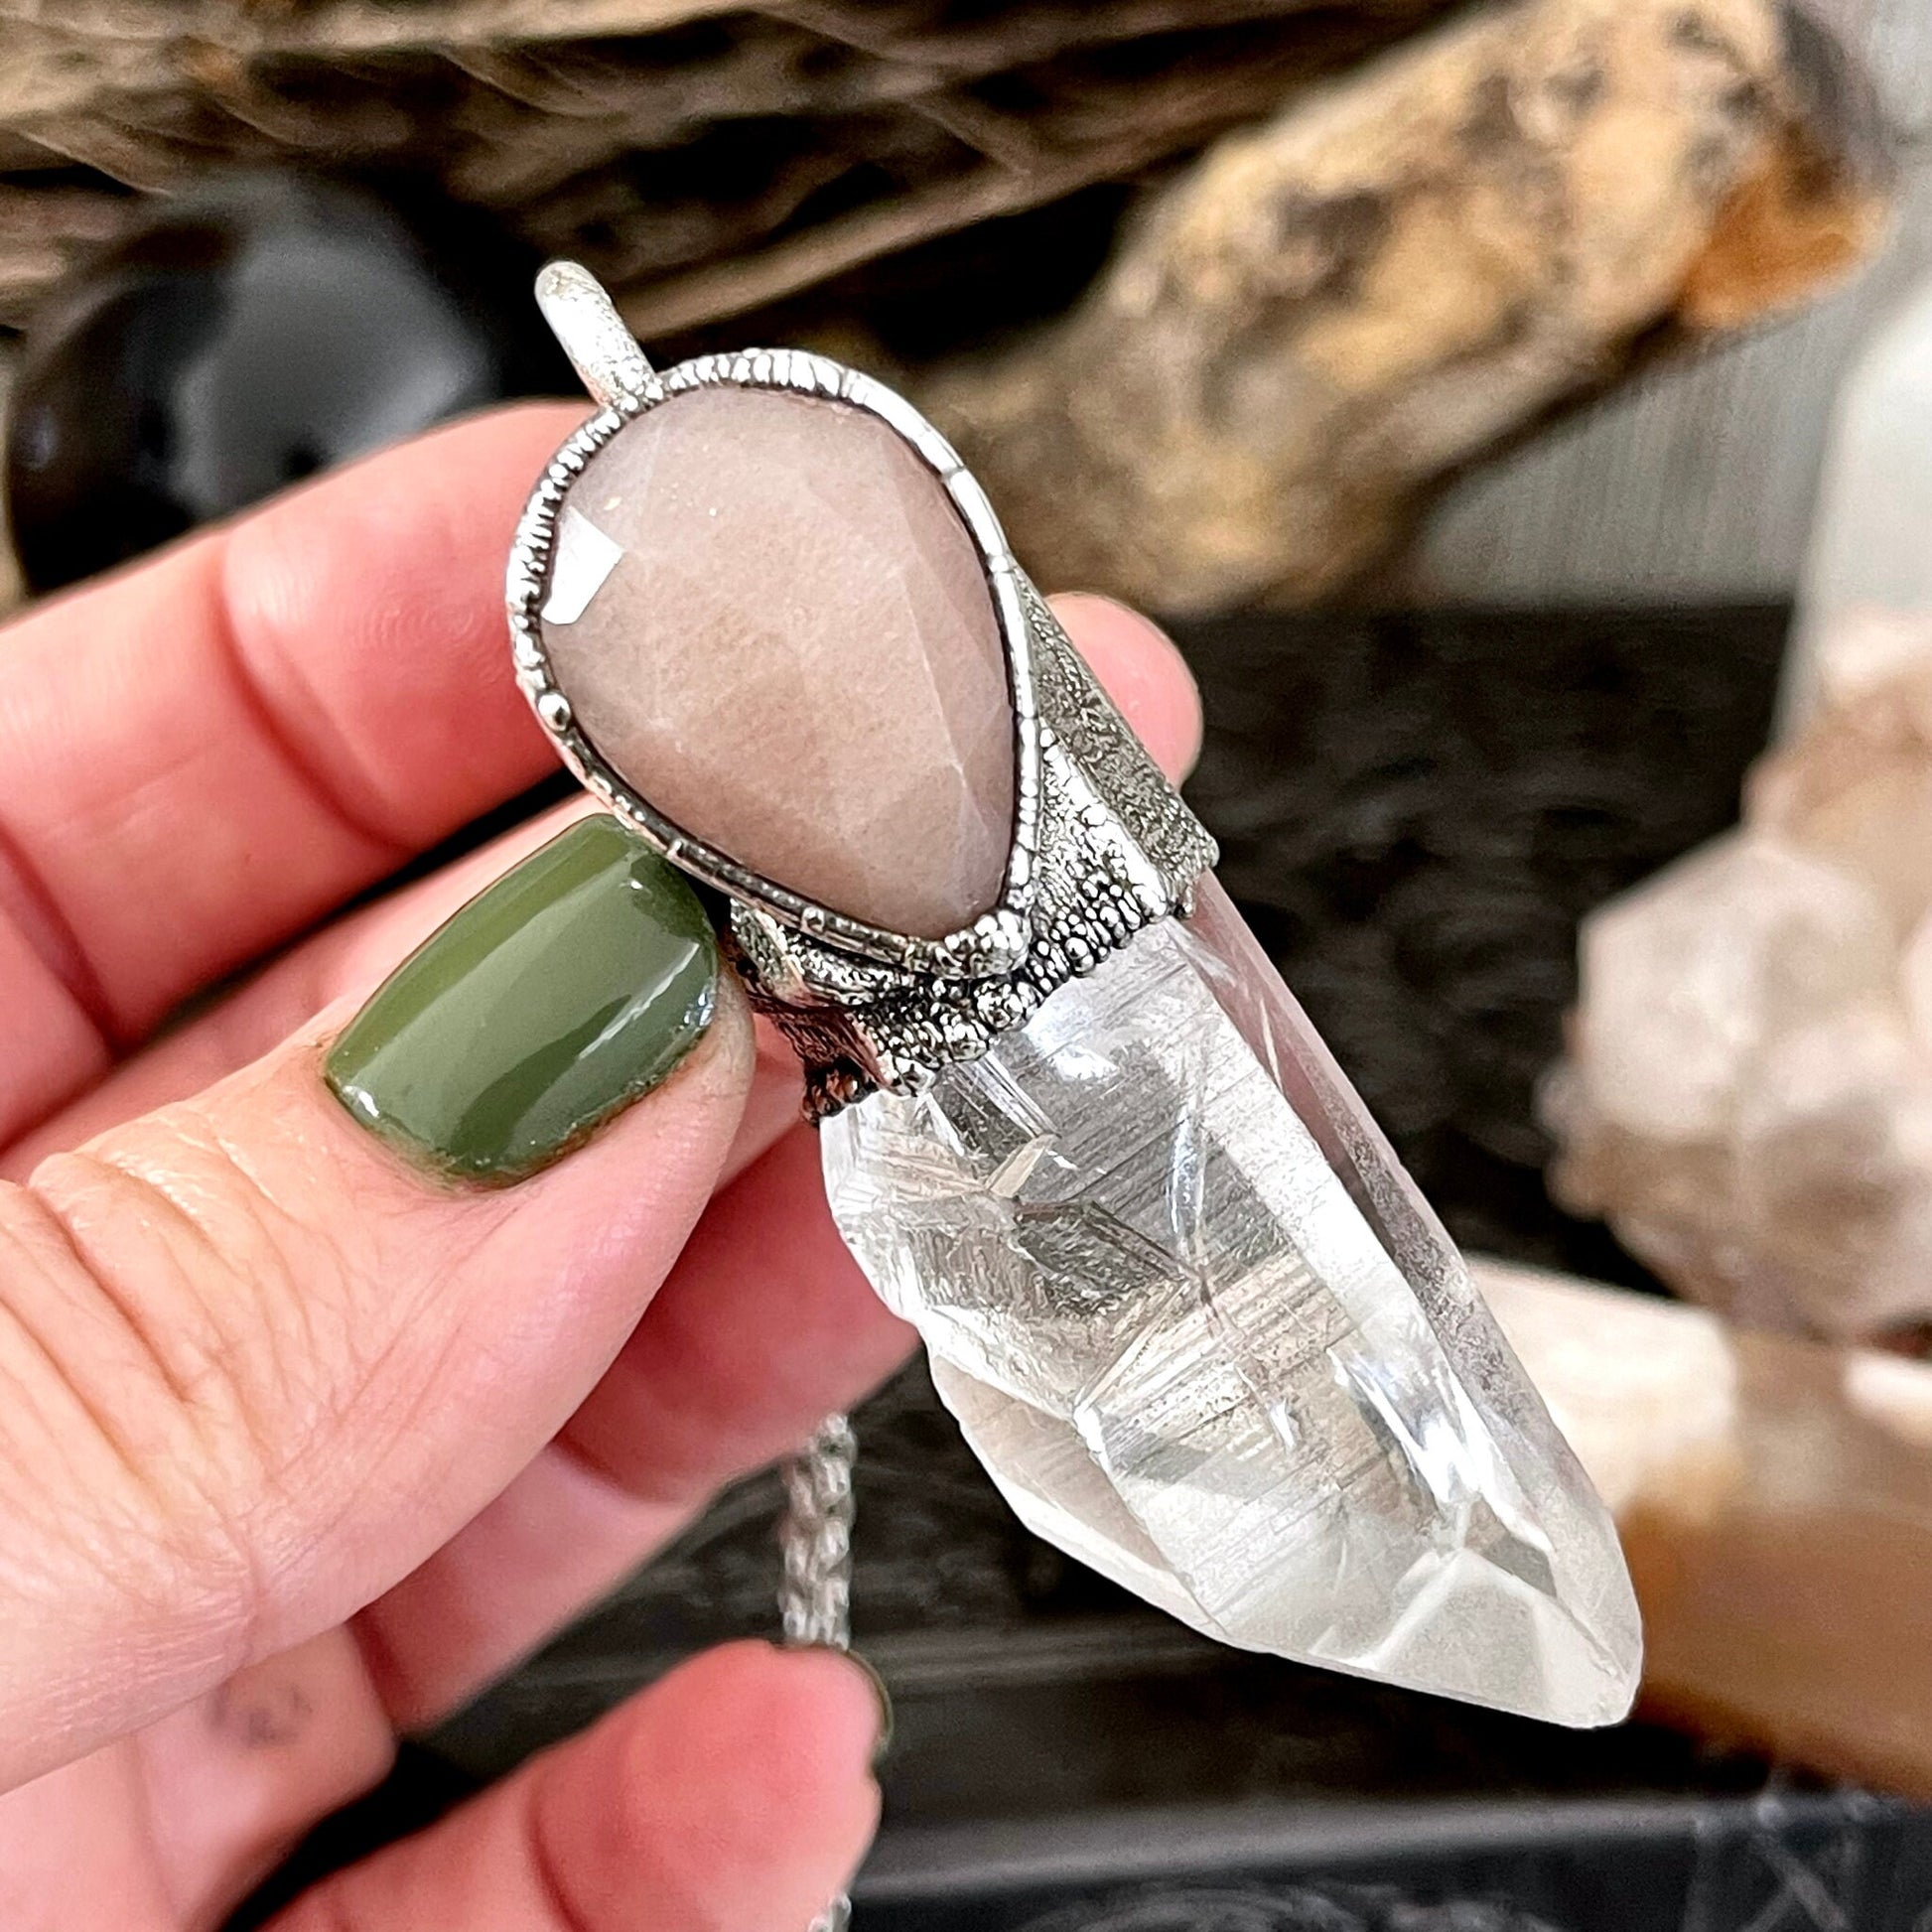 Raw Clear Quartz & Peach Moonstone Crystal Necklace in Fine Silver / Foxlark Collection - One of a Kind / Pink Stone Jewelry